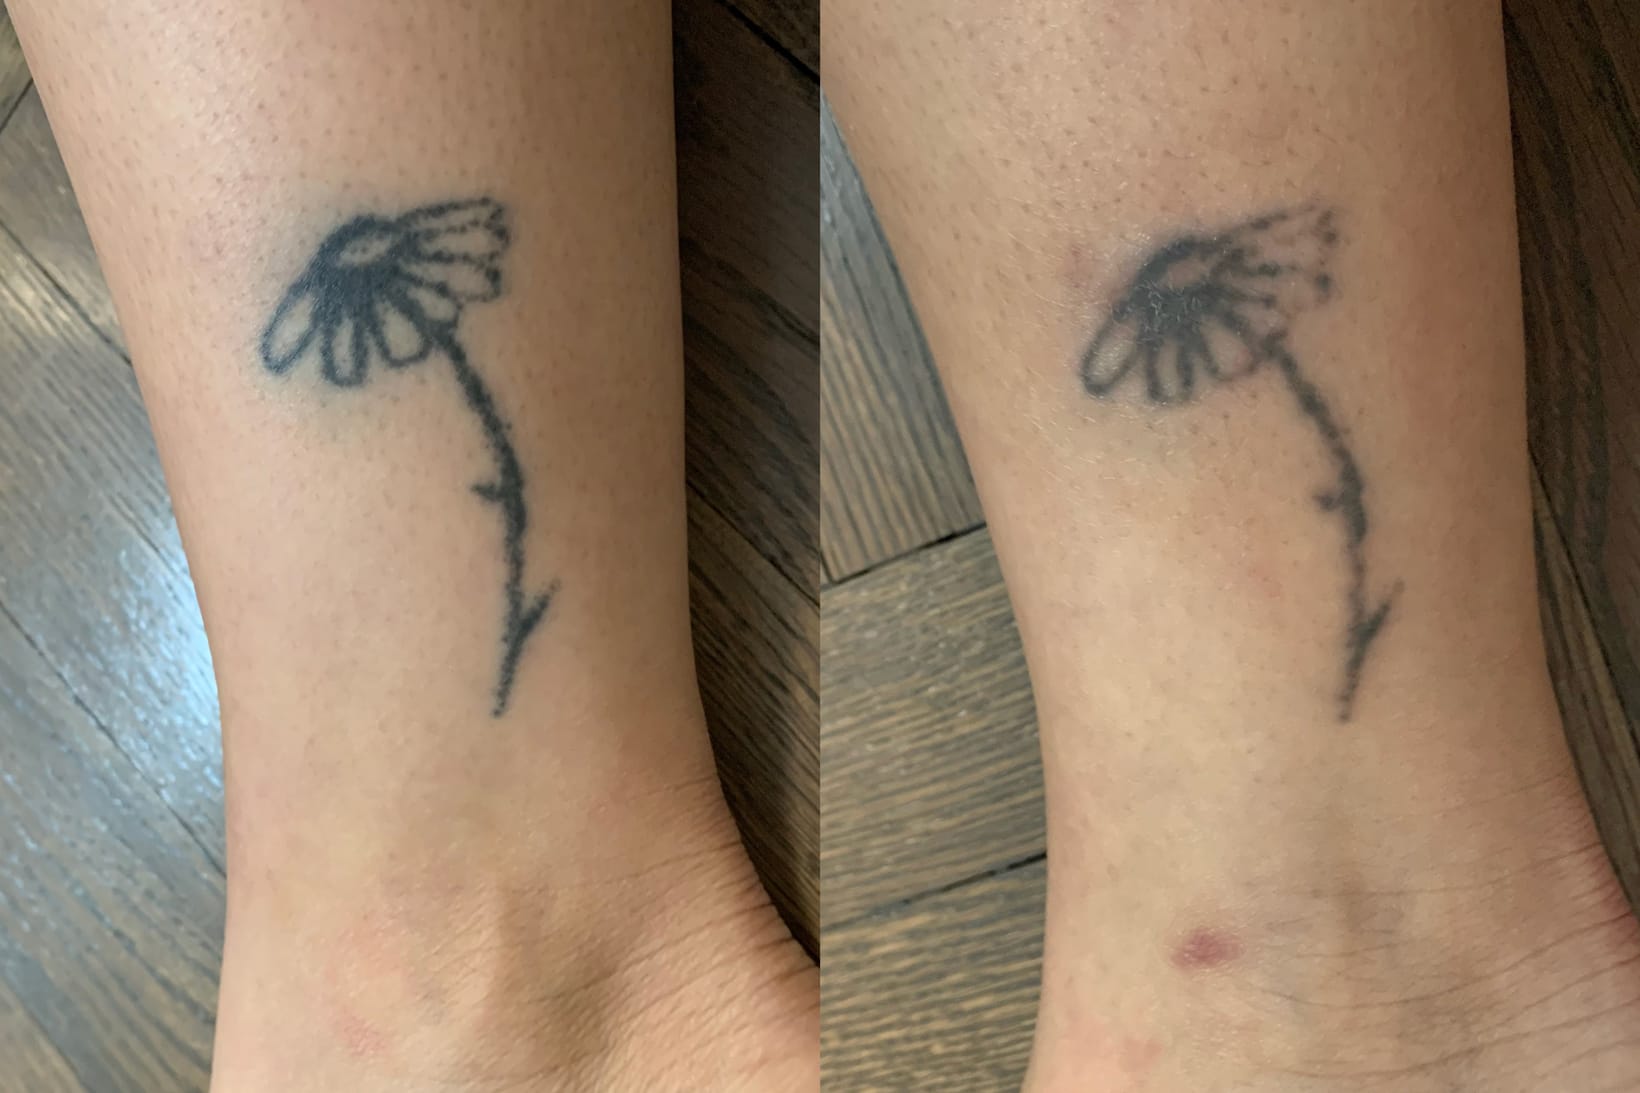 Black Tattoo Healing And Turning Grey  Heres Why  AuthorityTattoo